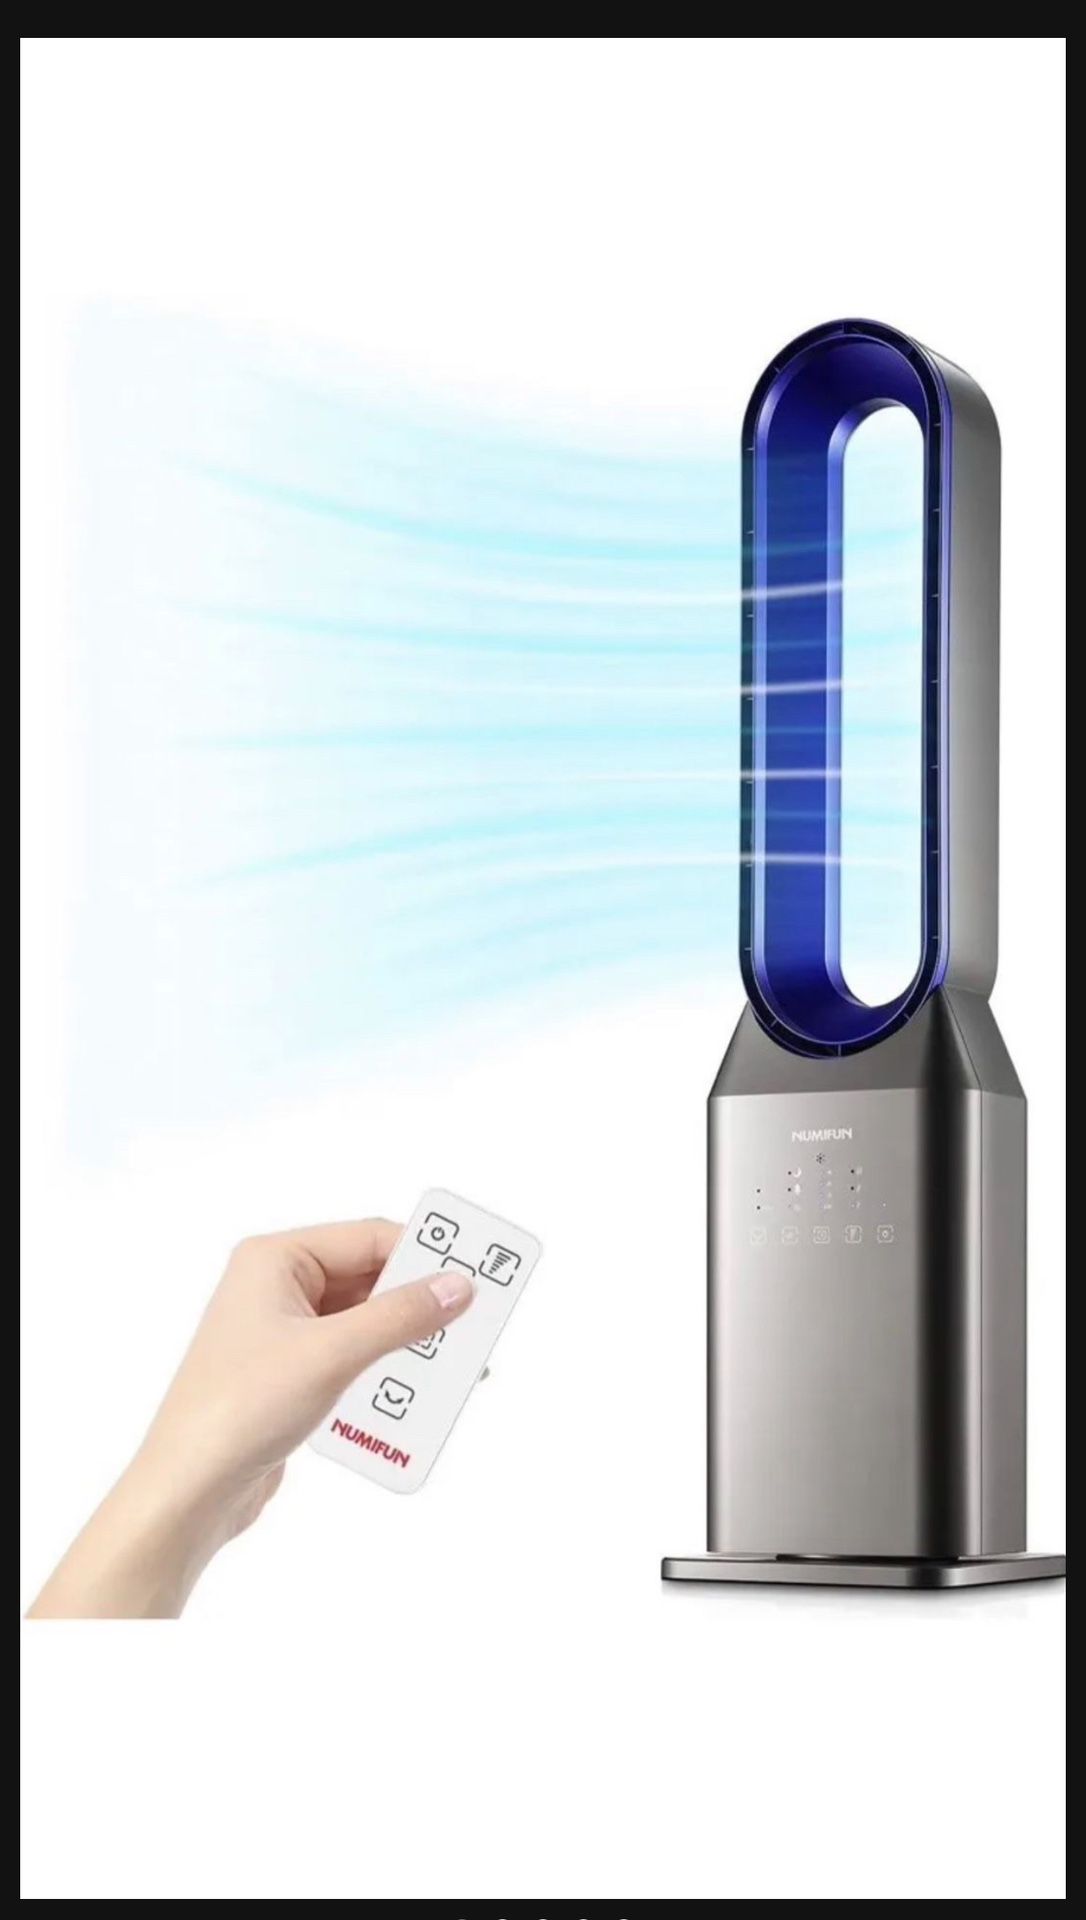 Brand New Bladeless Tower Fan 36 Inches Portable Electric Standing Floor Fan Air Circulator with Oscillating and Remote Control